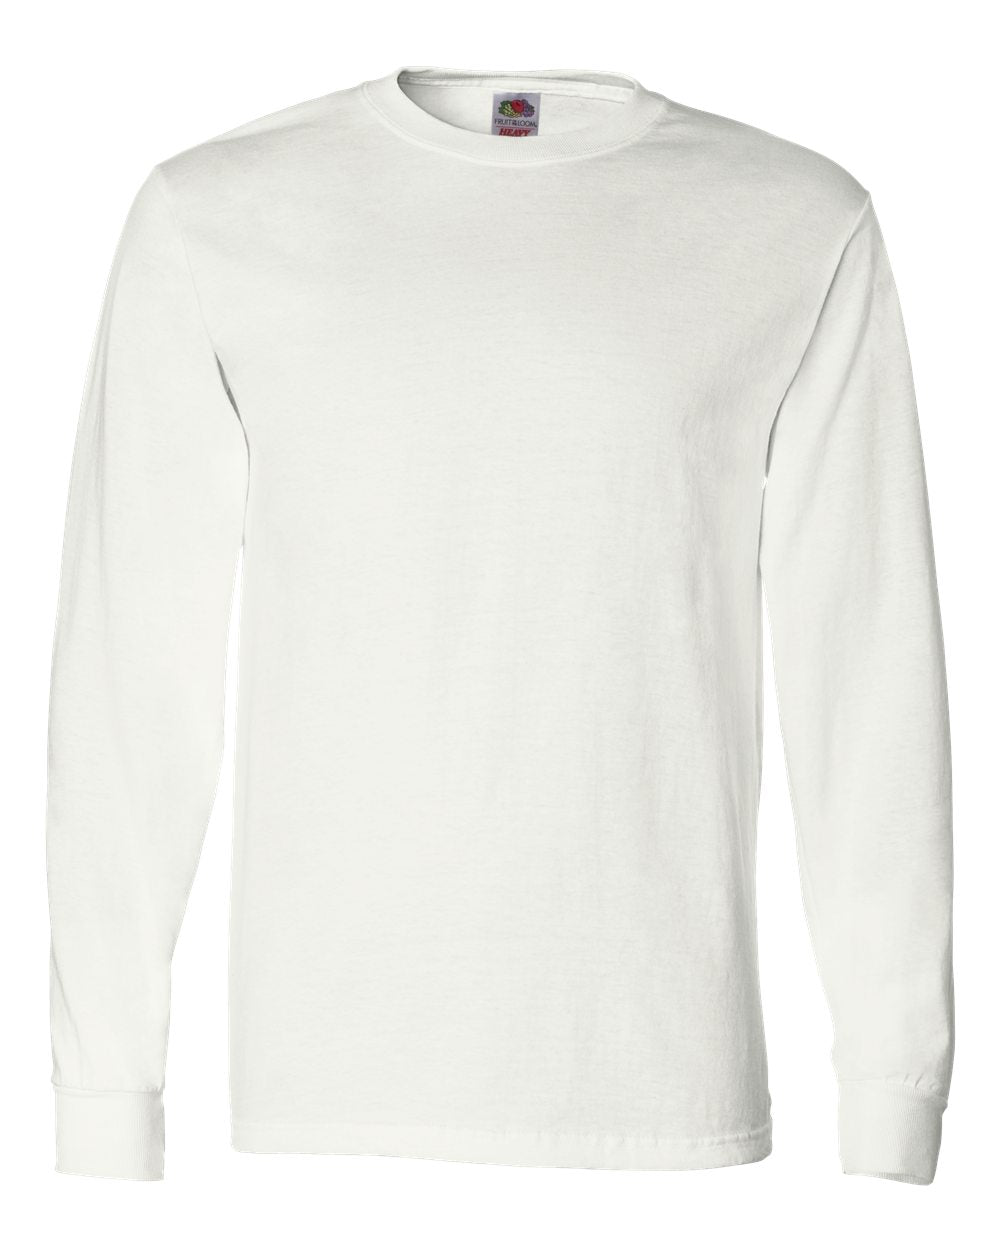 Pretreated Fruit of the Loom 4930R HD Cotton Long Sleeve T-Shirt